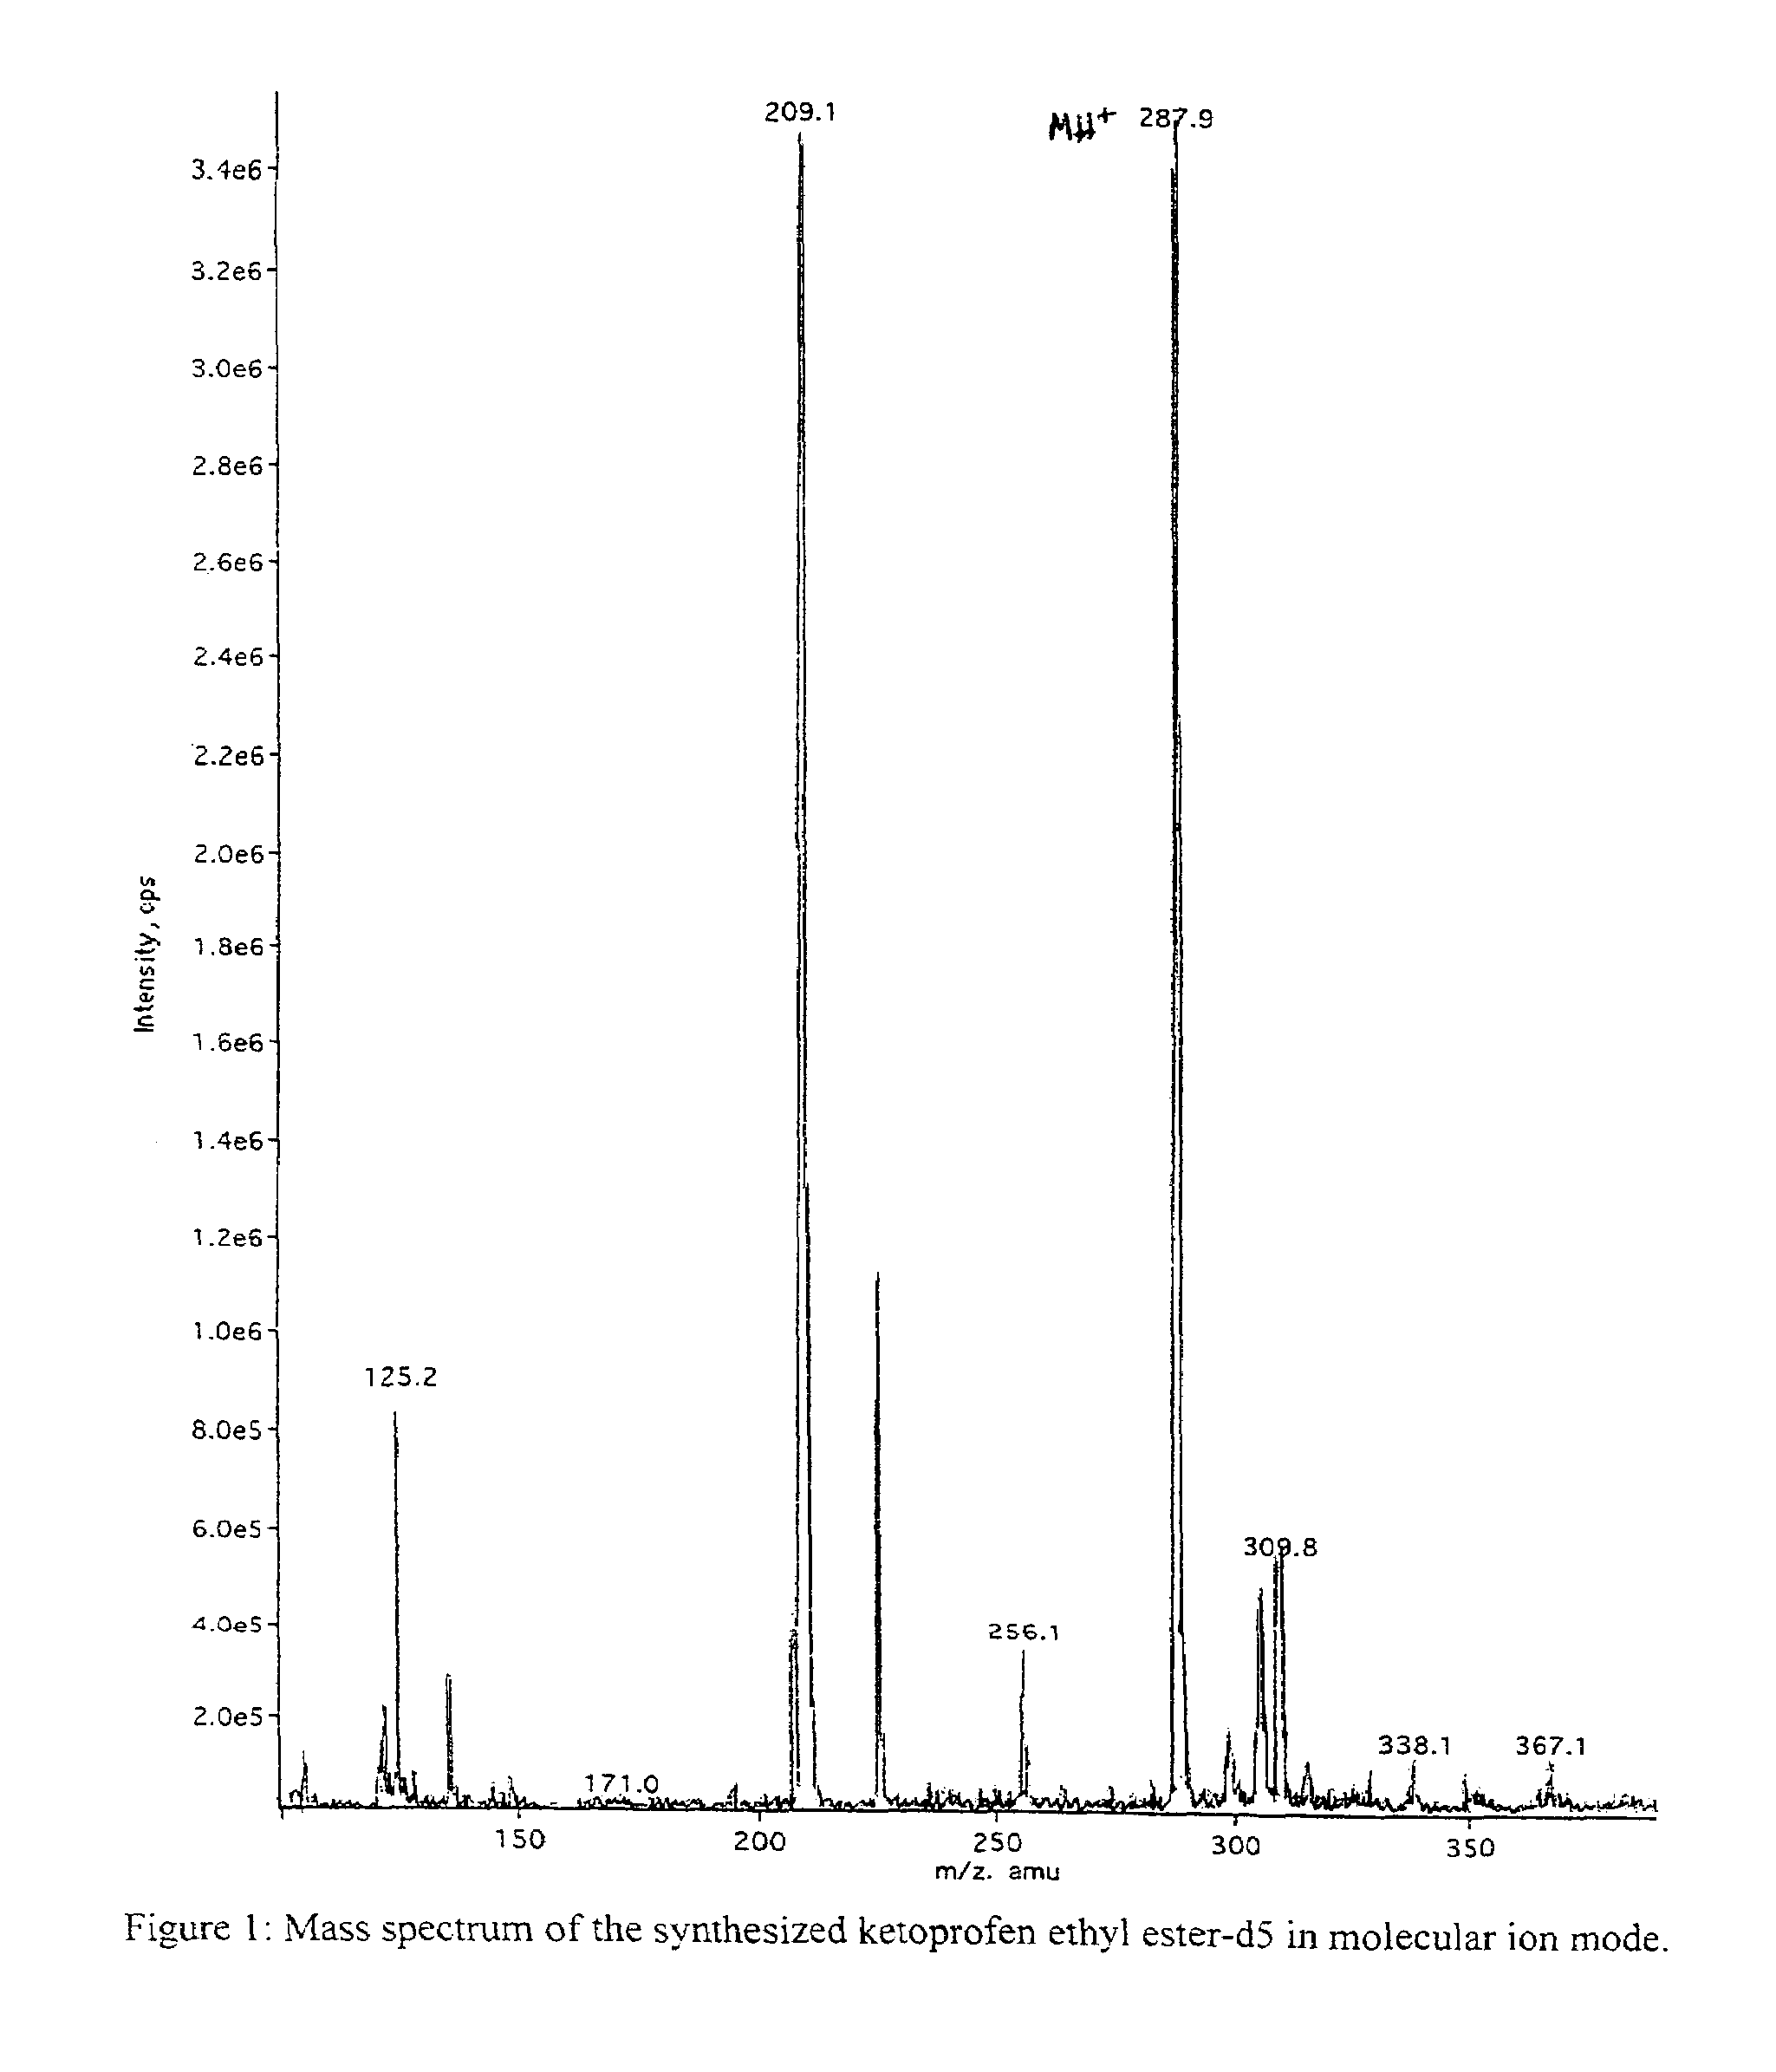 Method of quantification of carboxylic acids by mass spectrometry